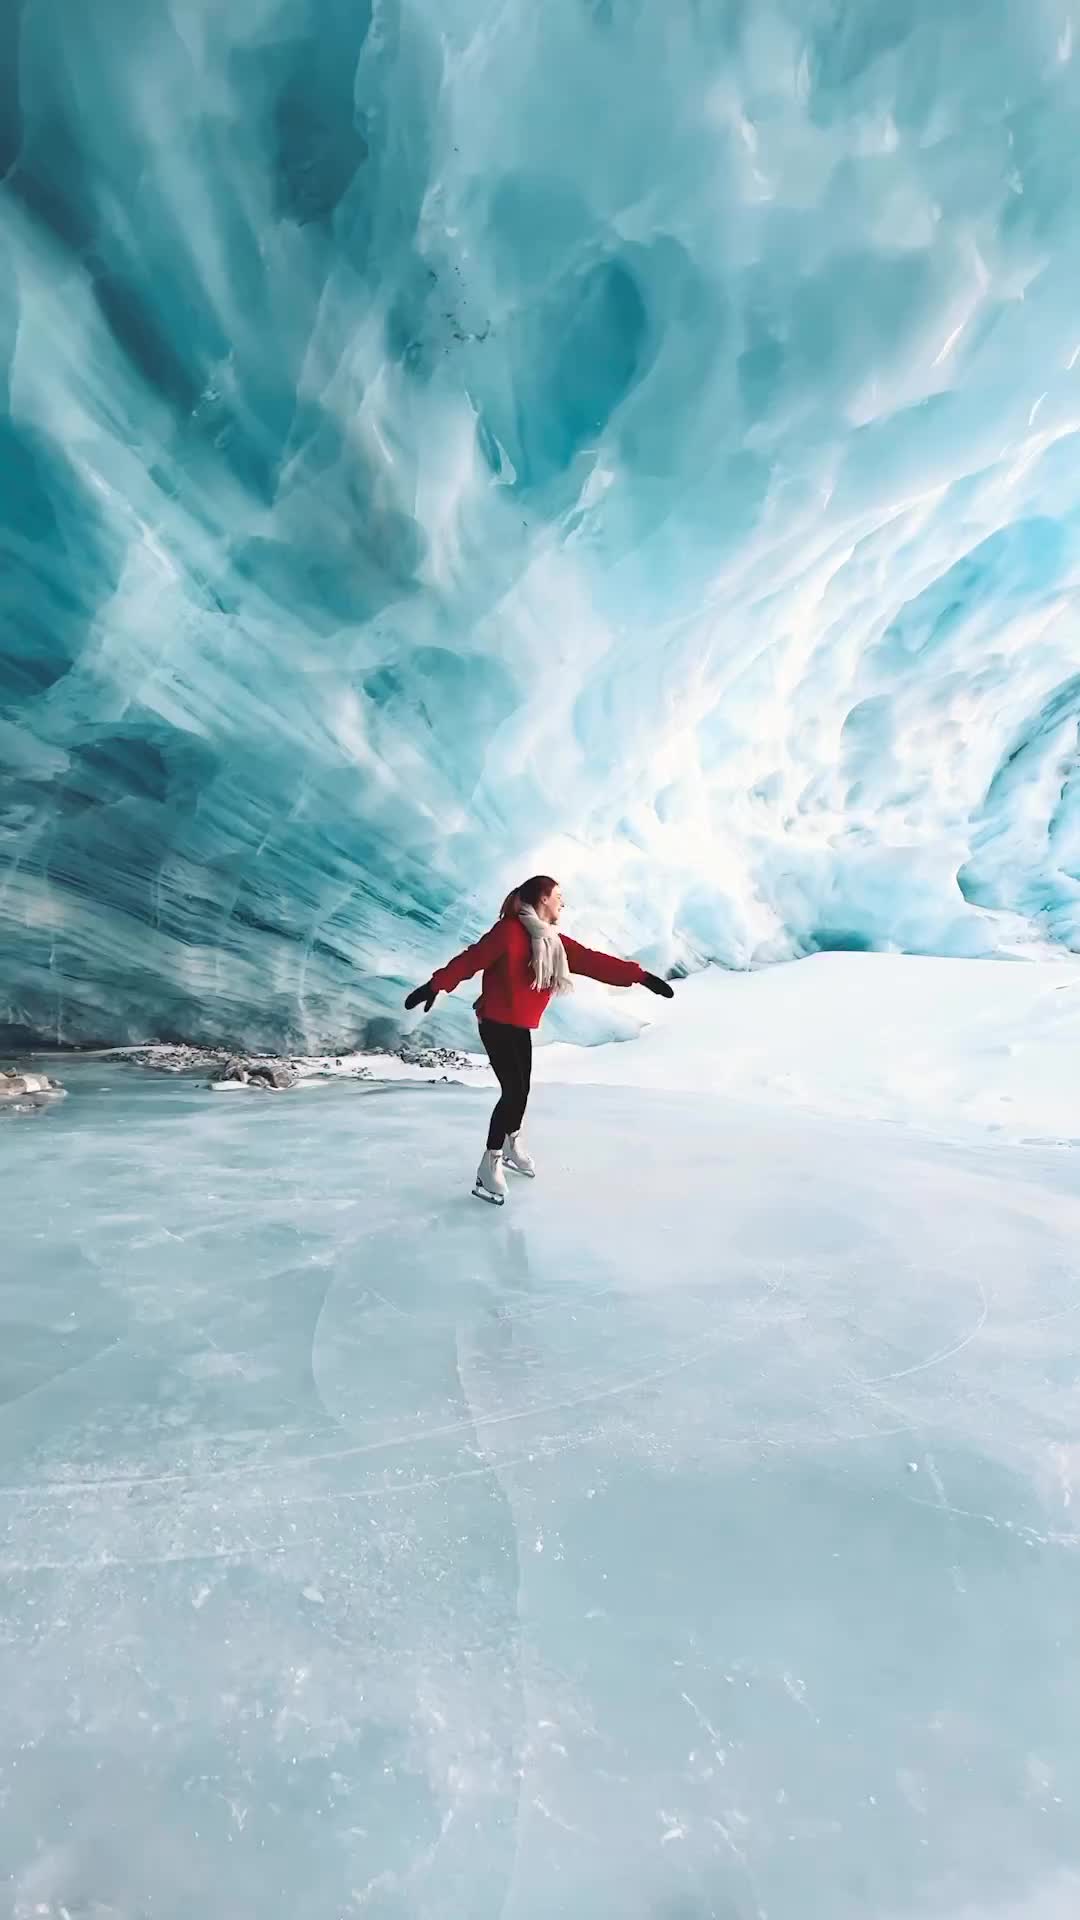 Spinning in a Glacier Cave: An Ice Skating Adventure